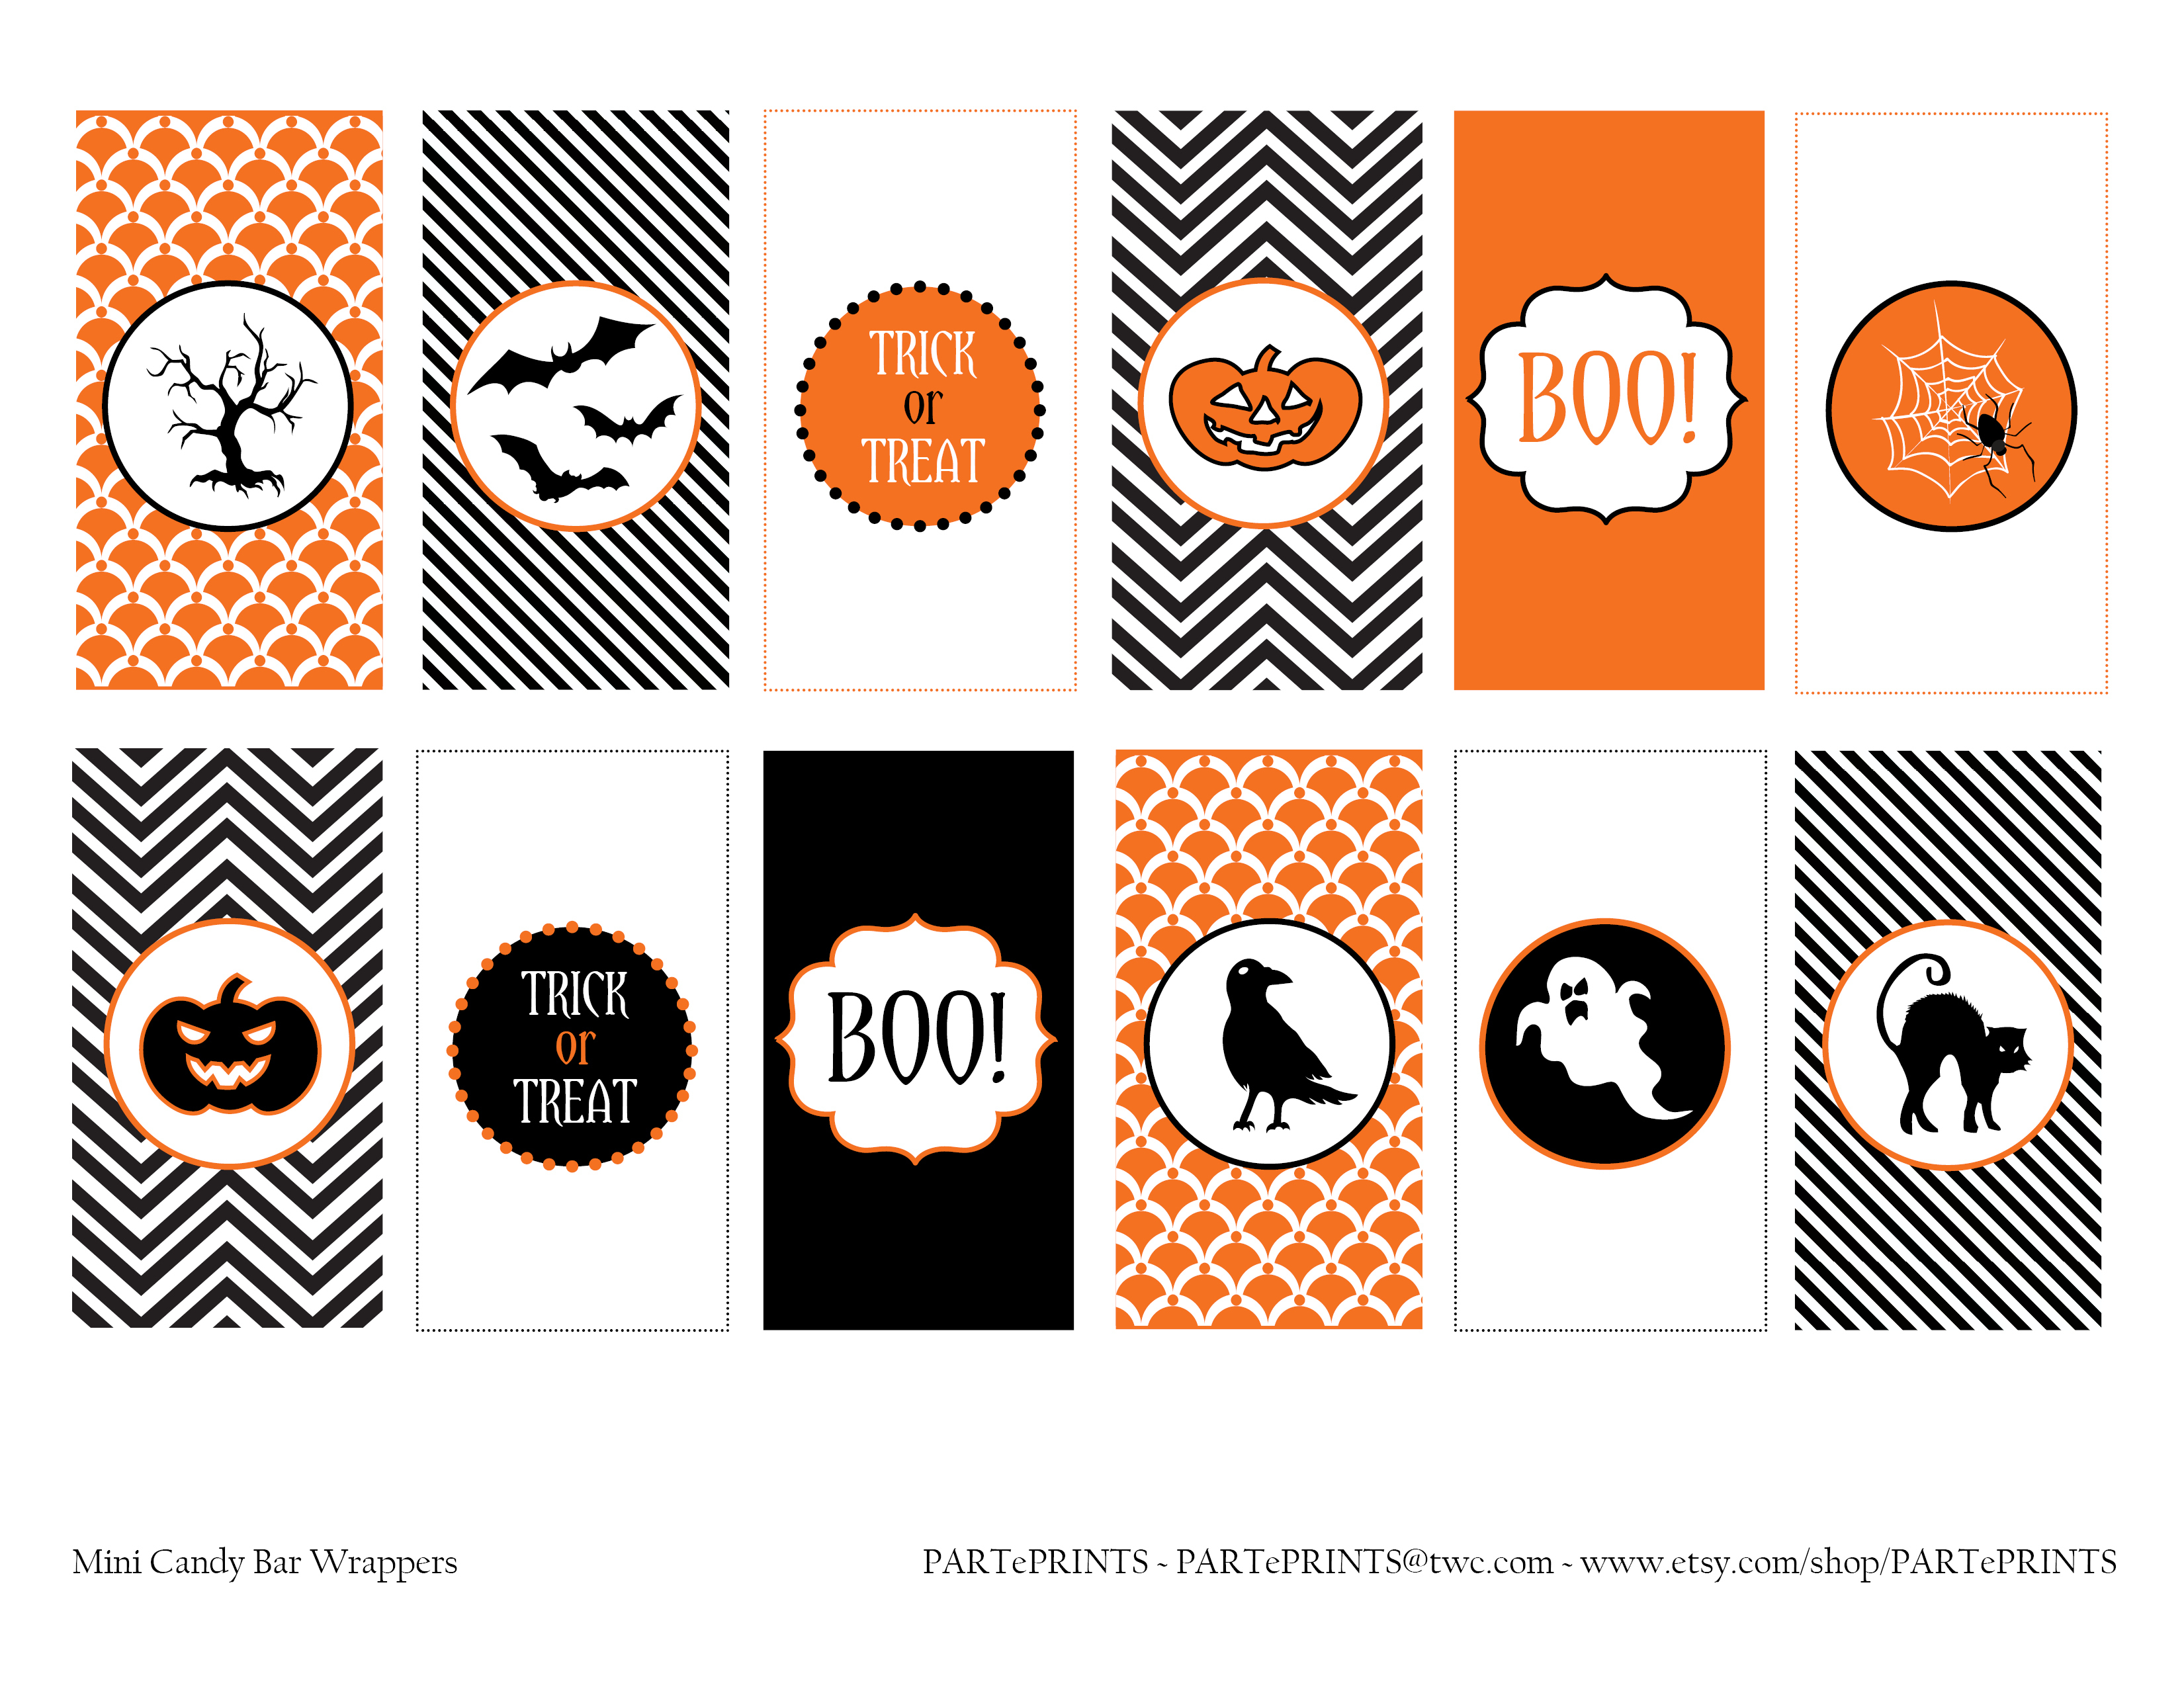 Free Halloween Printables From Parteprints | Catch My Party - Free Printable Halloween Banner Templates